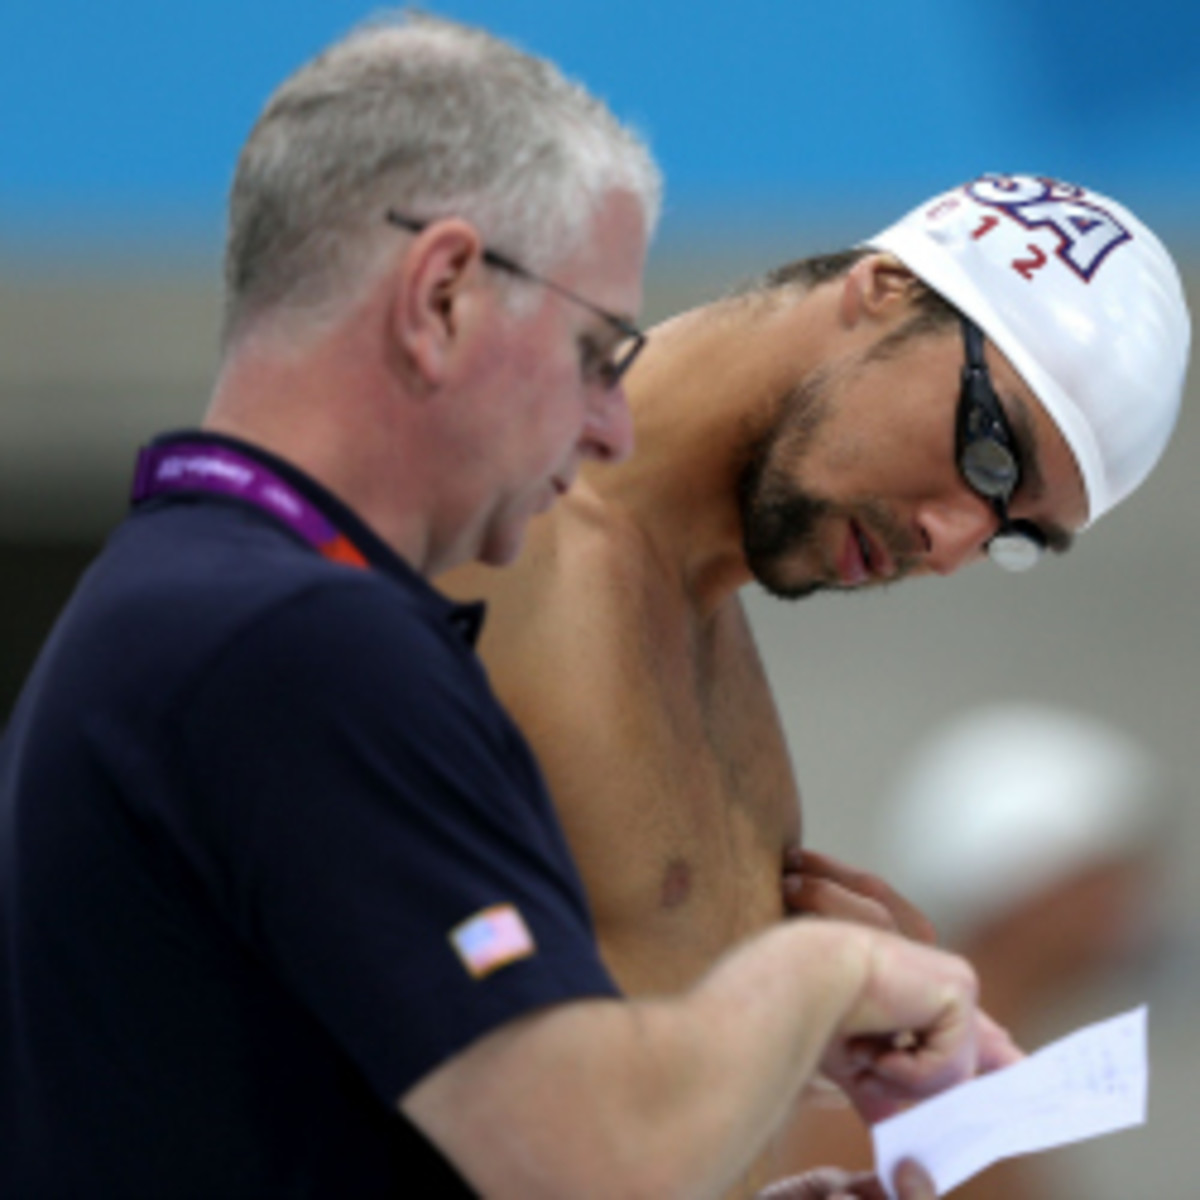 Bob Bowman speaks with Michael Phelps during a training session. Bowman will be advising Turkey on its swim program as a consultant. (Clive Rose/Getty Images)